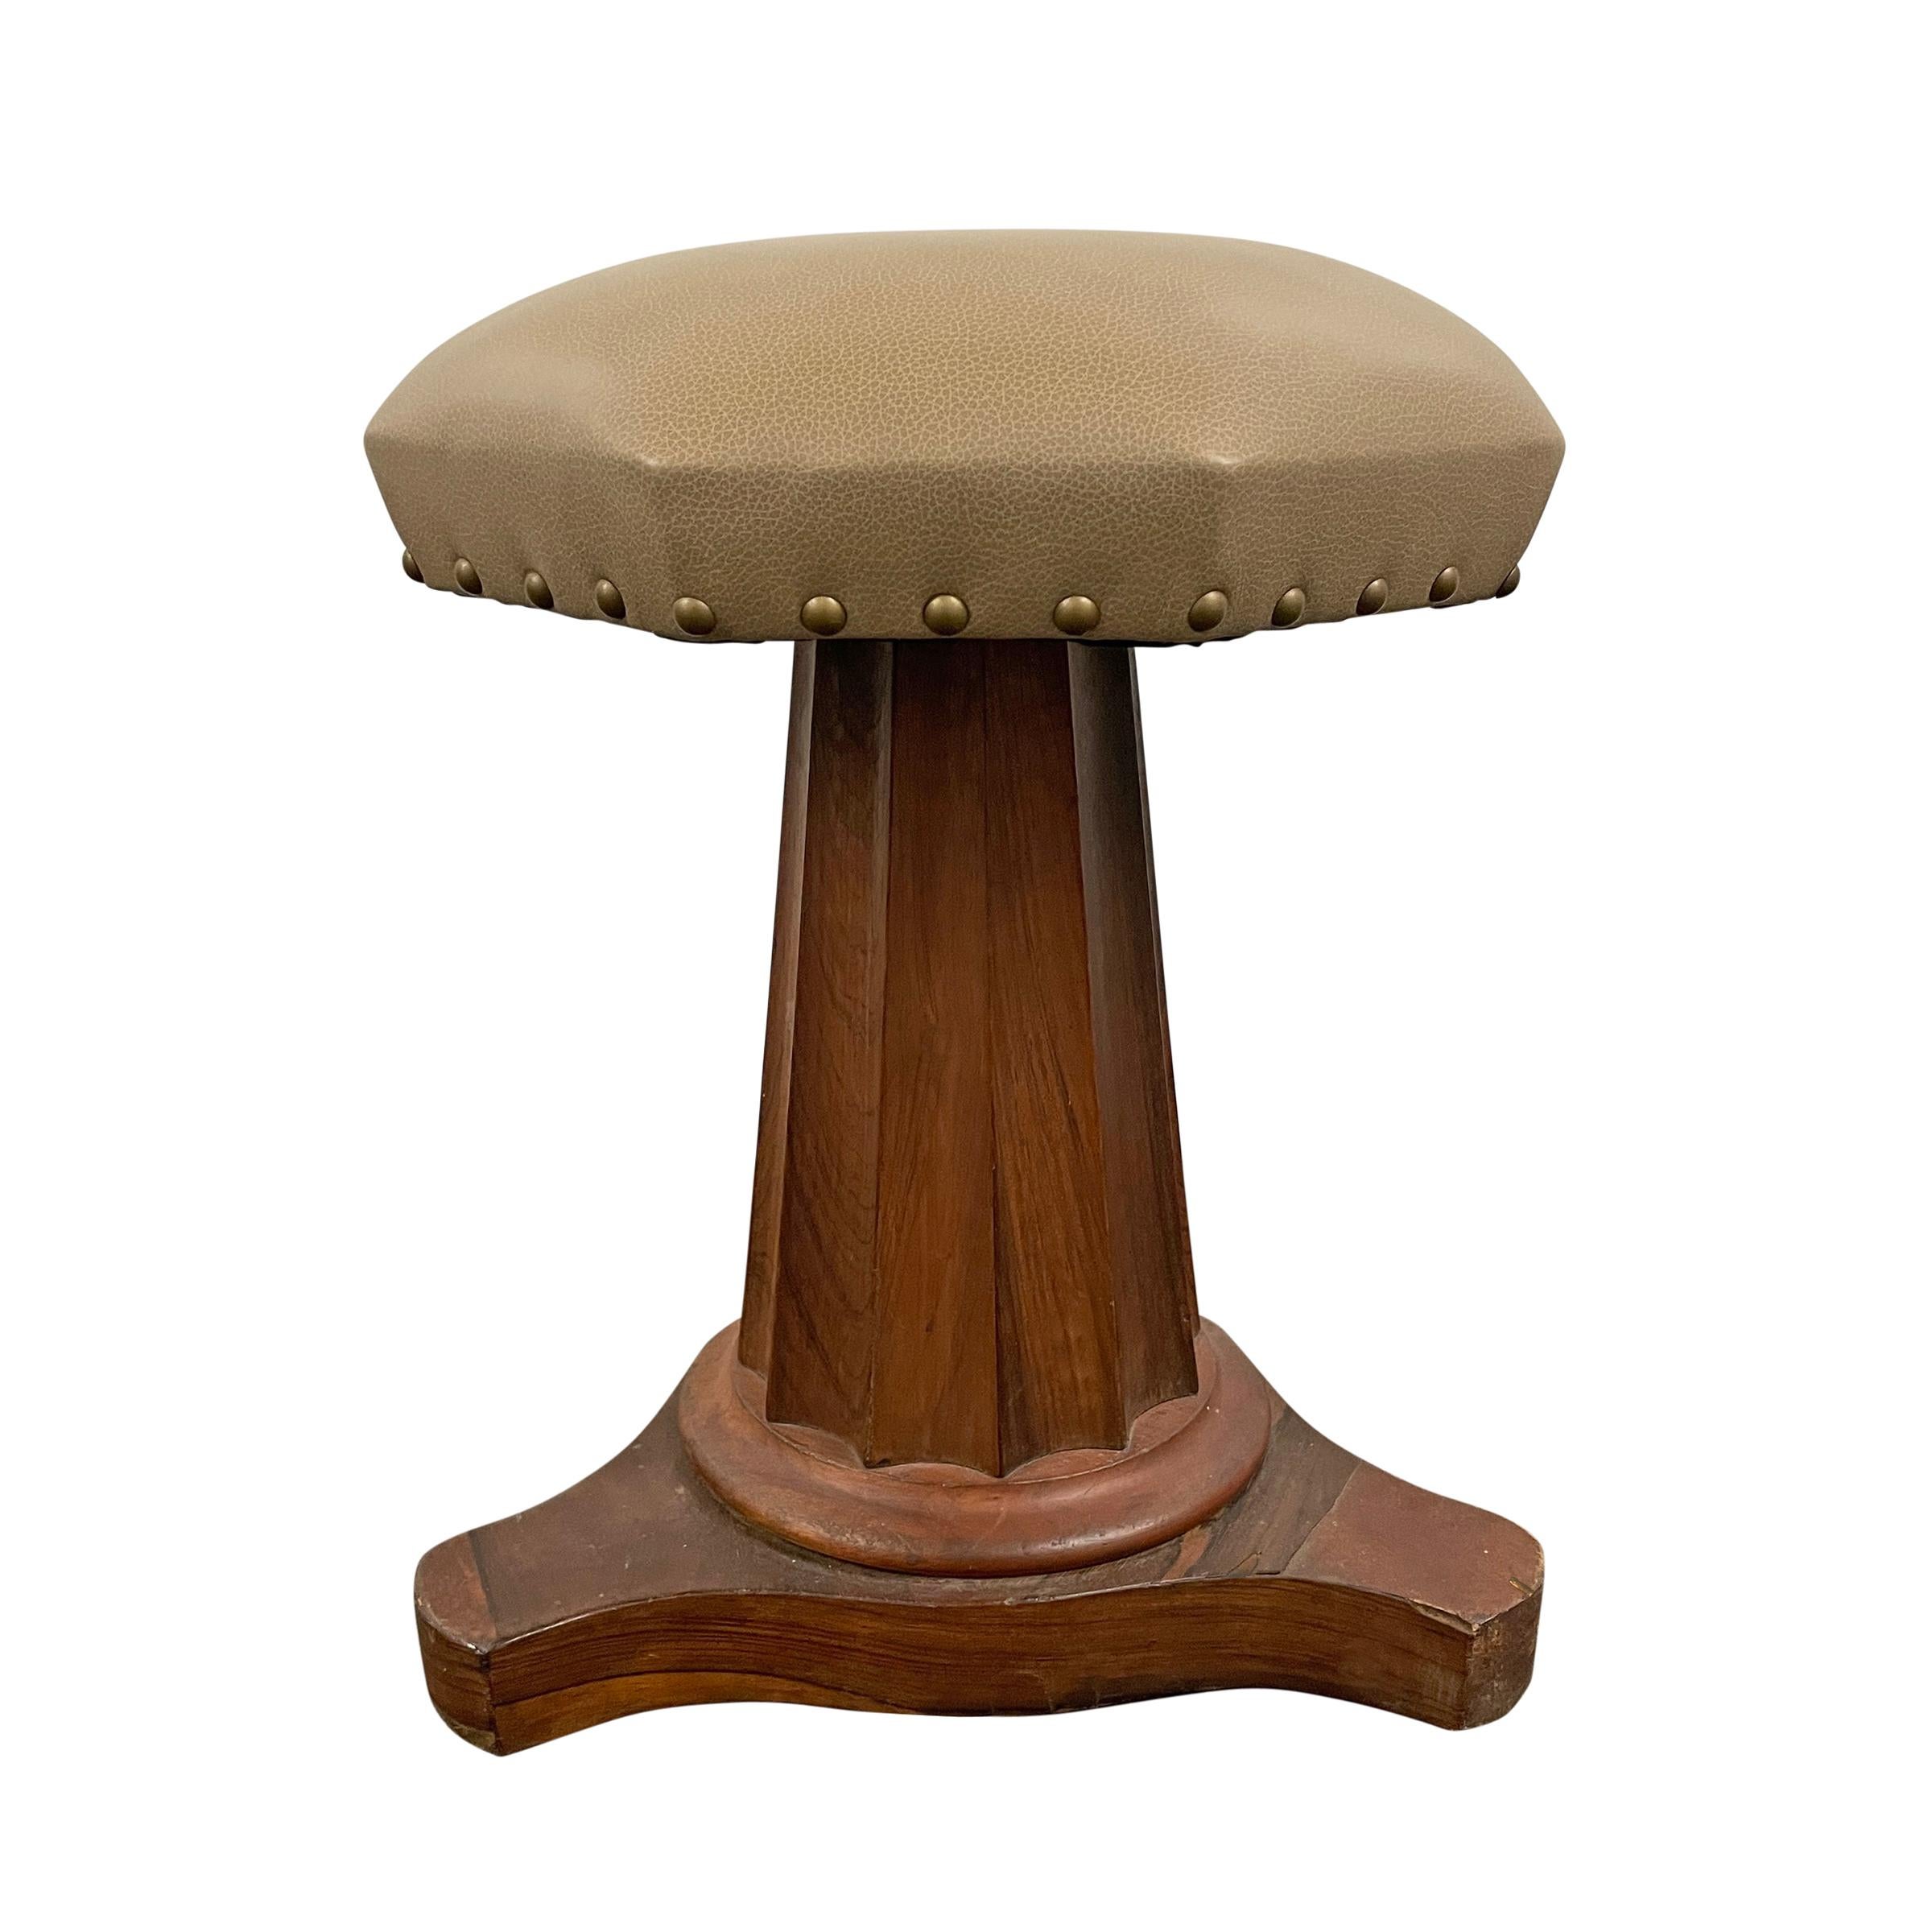 Early 20th Century American Empire Stool In Good Condition For Sale In Chicago, IL